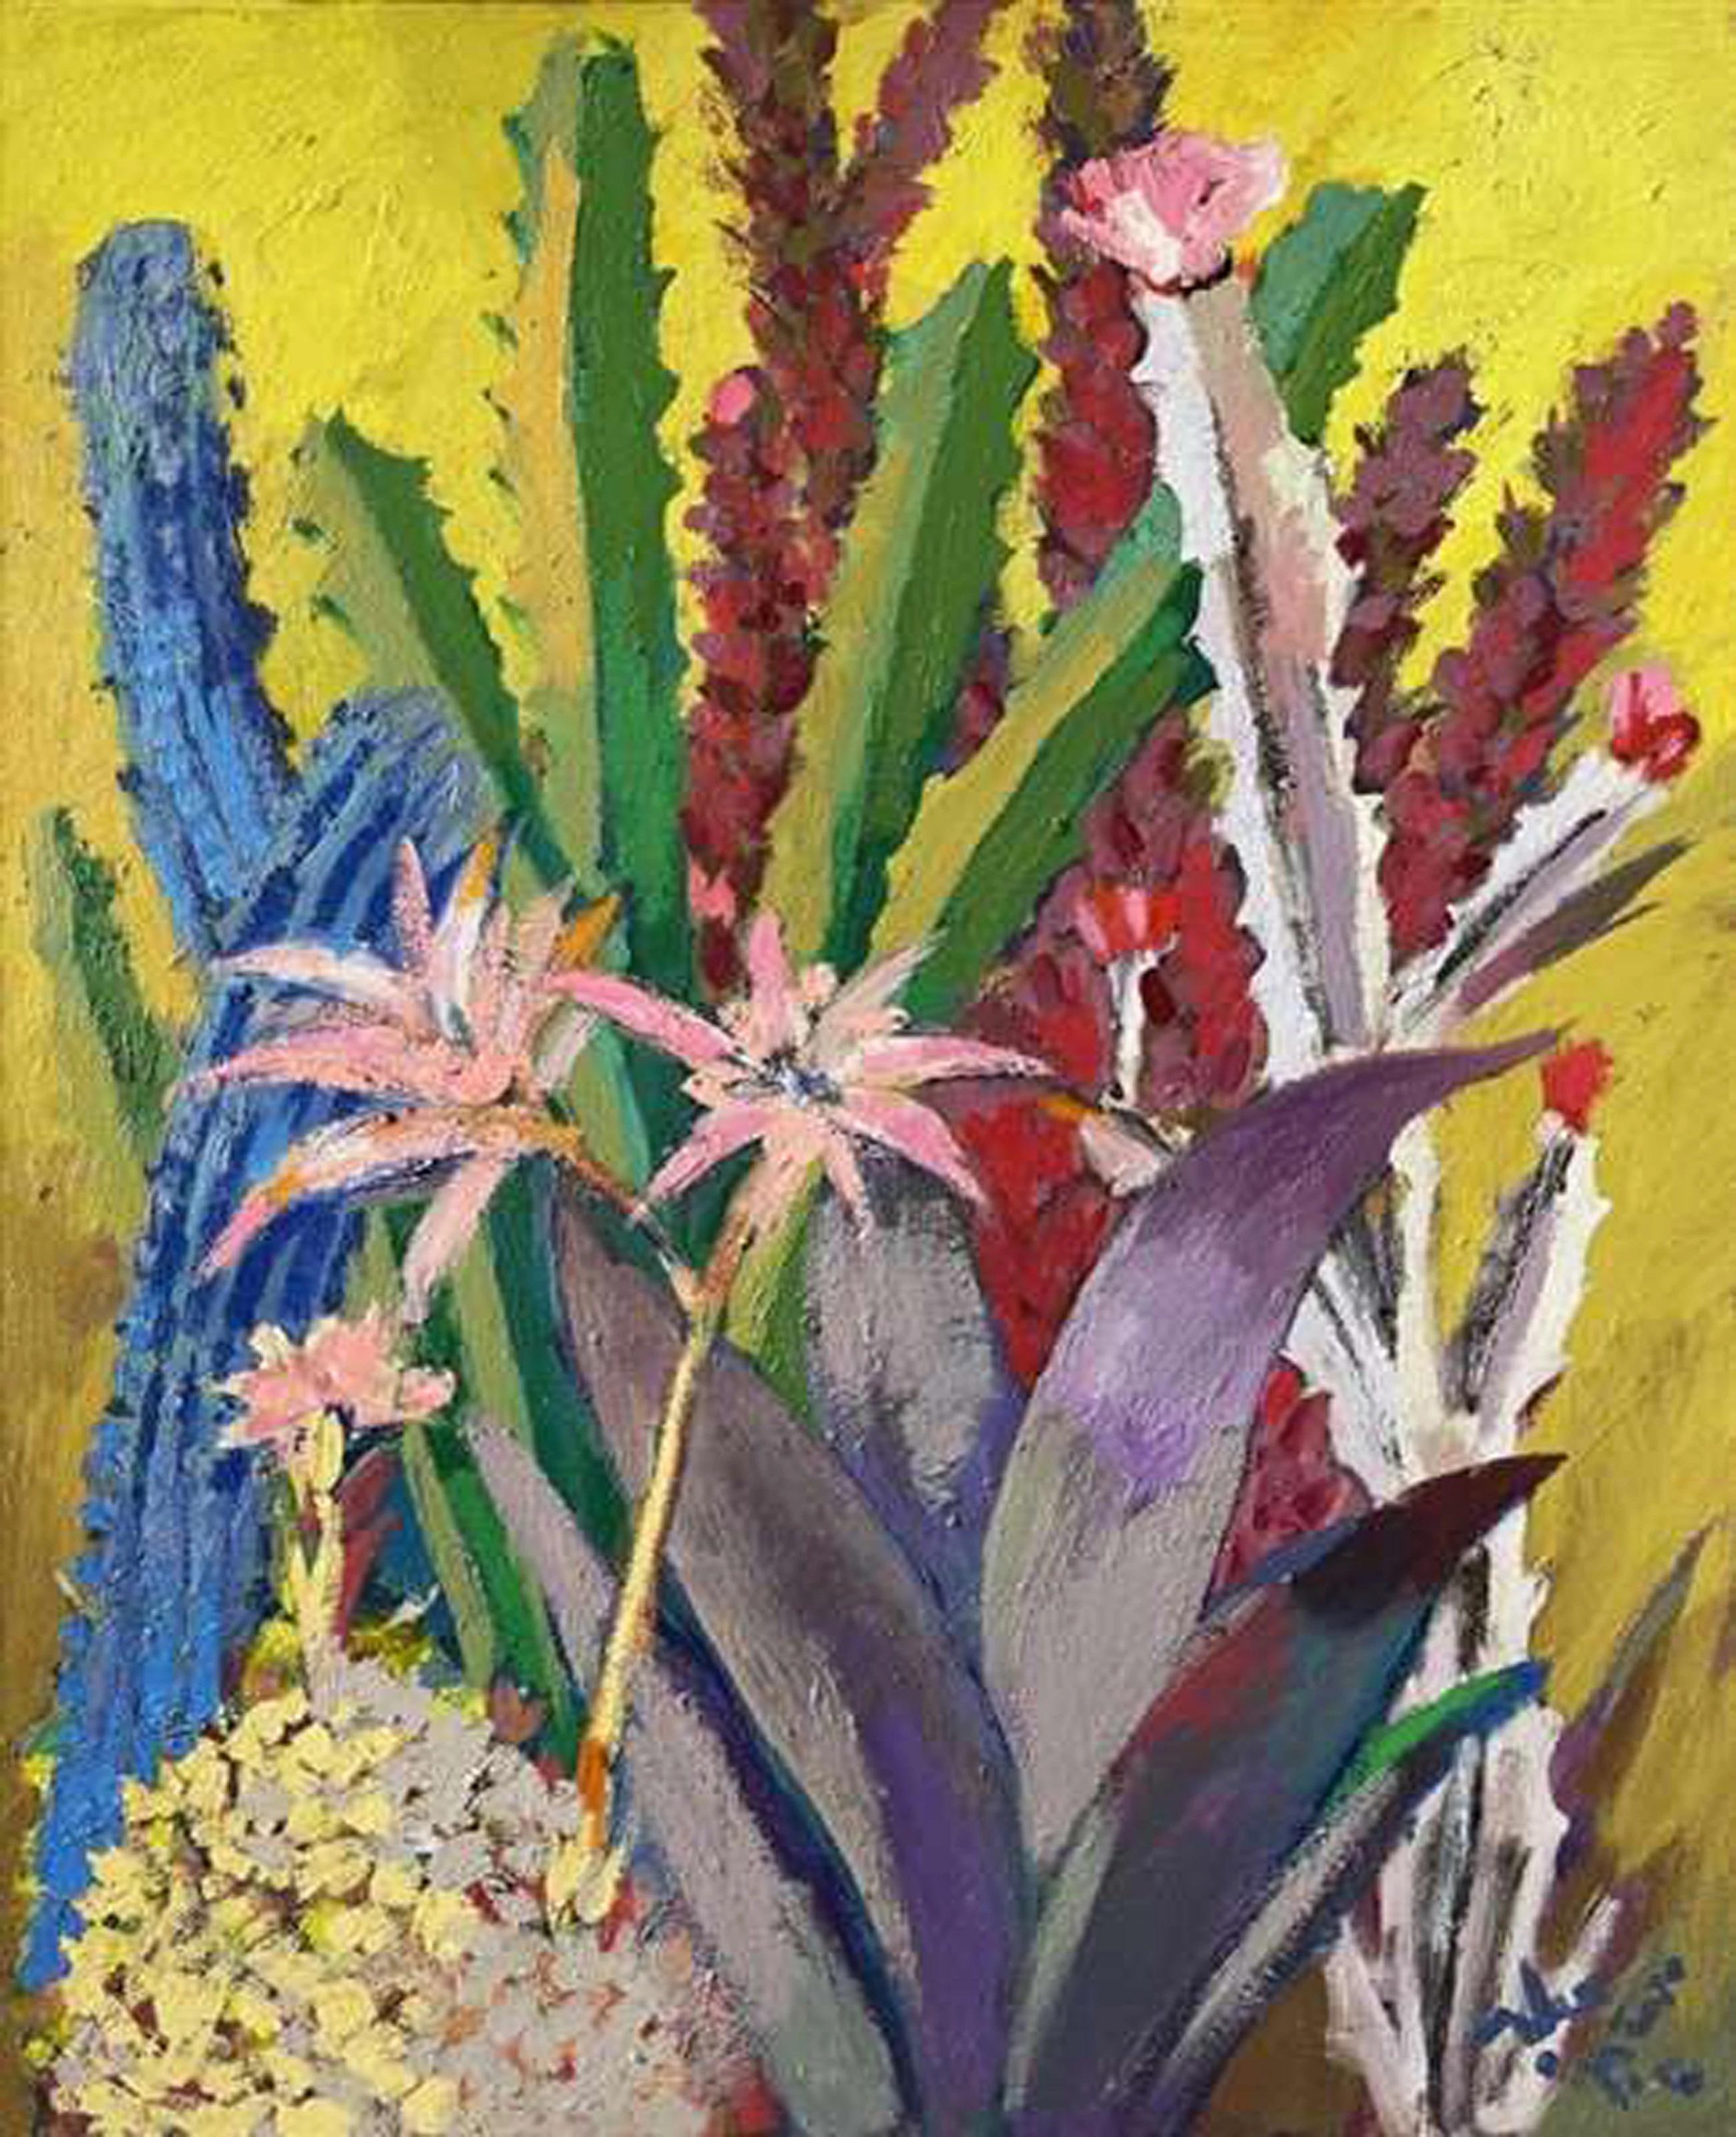 "Cactus in Yellow" Oil Painting 31.5" x 24" inch by Mohamed Abla

Mohamed Abla was born in Mansoura (North of Egypt) in 1953. There he spent his childhood and finished school. In 1973 he moved to Alexandria to start a five-year art study at the